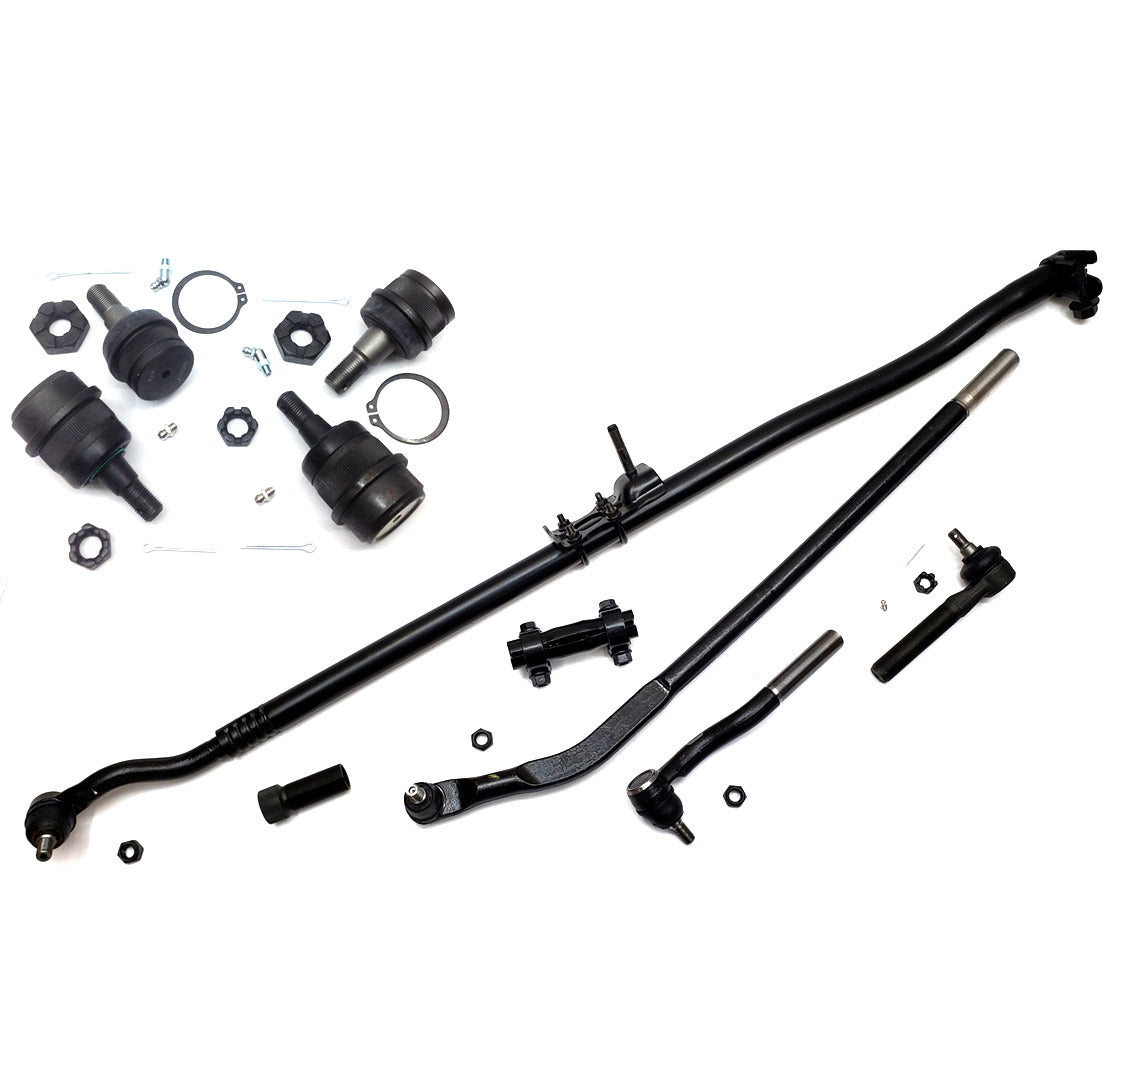 HD Ball Joint Drag Link Tie Rod Steering Kit for 2007-2917 Jeep Wrangler